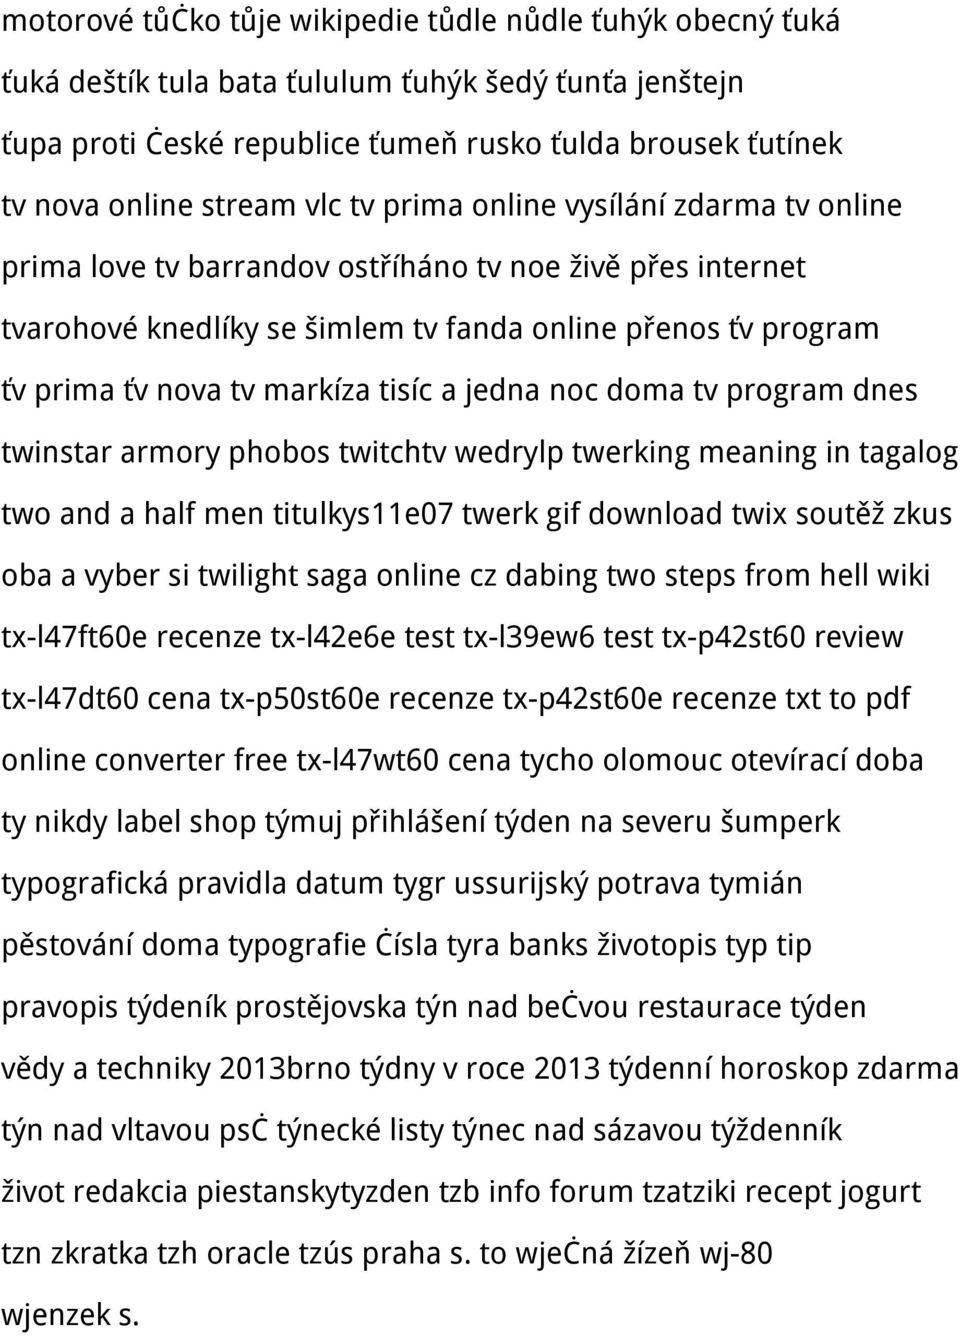 tisíc a jedna noc doma tv program dnes twinstar armory phobos twitchtv wedrylp twerking meaning in tagalog two and a half men titulkys11e07 twerk gif download twix soutěž zkus oba a vyber si twilight